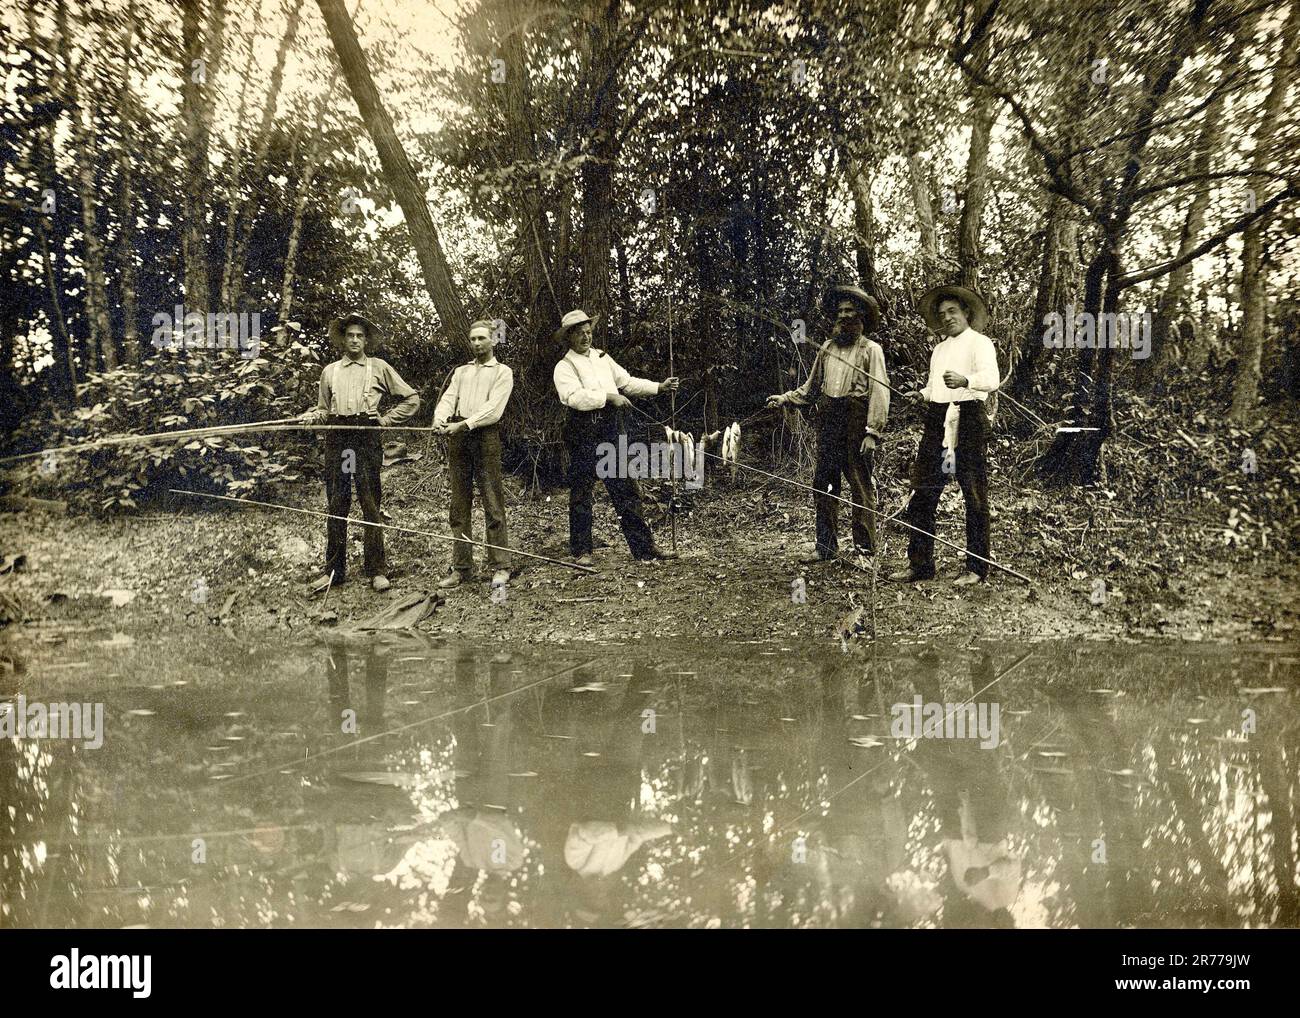 Fishing early 1900s, Vintage Fly Fishing, Old Fashioned Poles Stock Photo